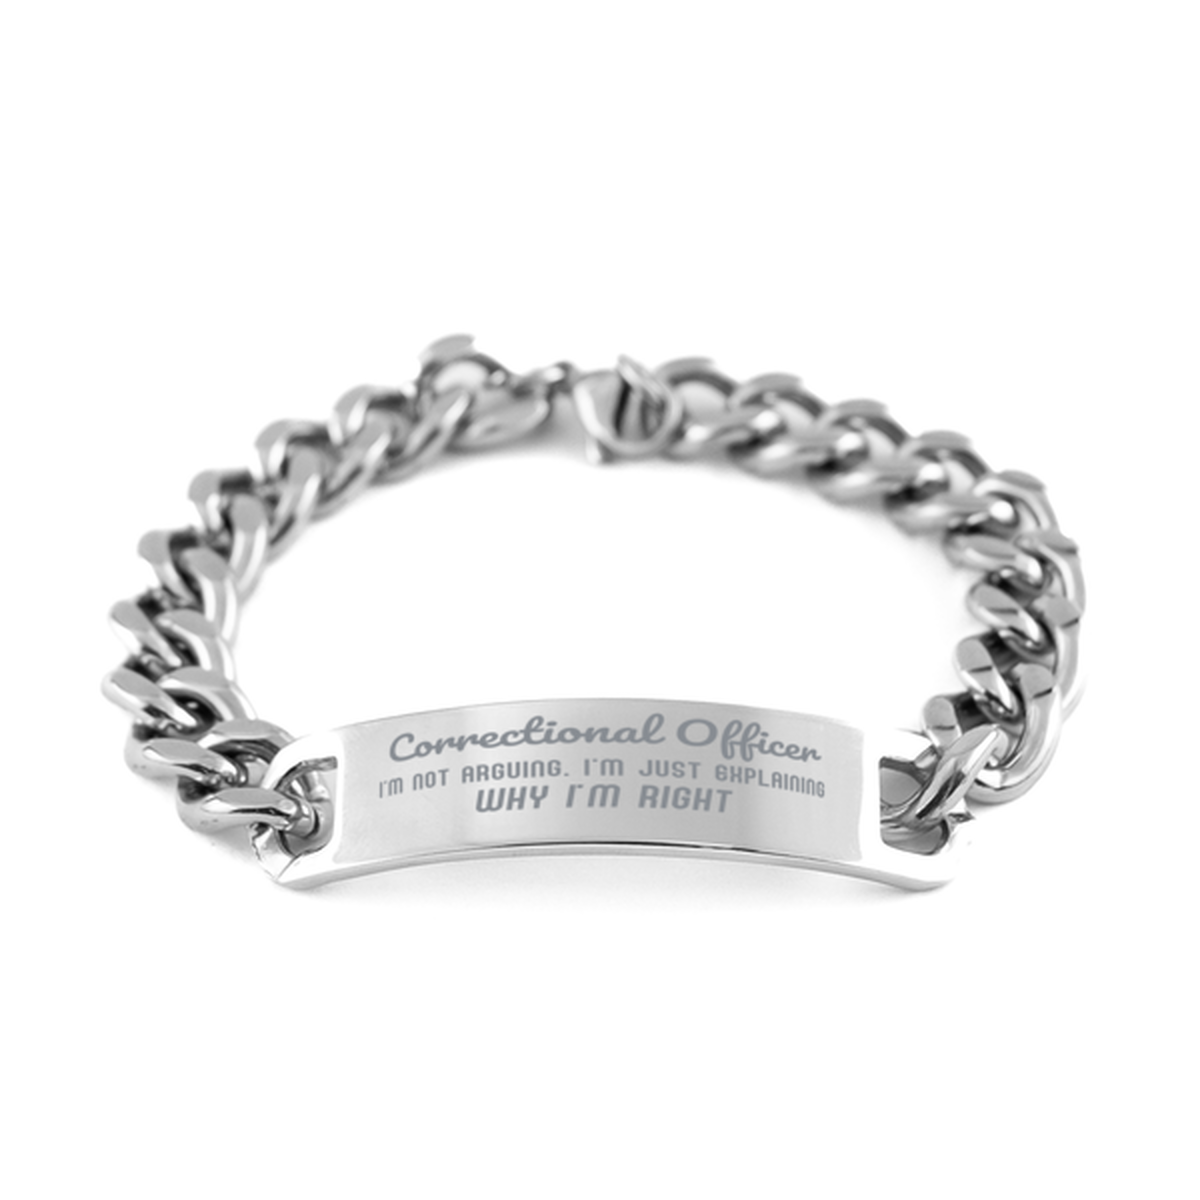 Correctional Officer I'm not Arguing. I'm Just Explaining Why I'm RIGHT Cuban Chain Stainless Steel Bracelet, Graduation Birthday Christmas Correctional Officer Gifts For Correctional Officer Funny Saying Quote Present for Men Women Coworker